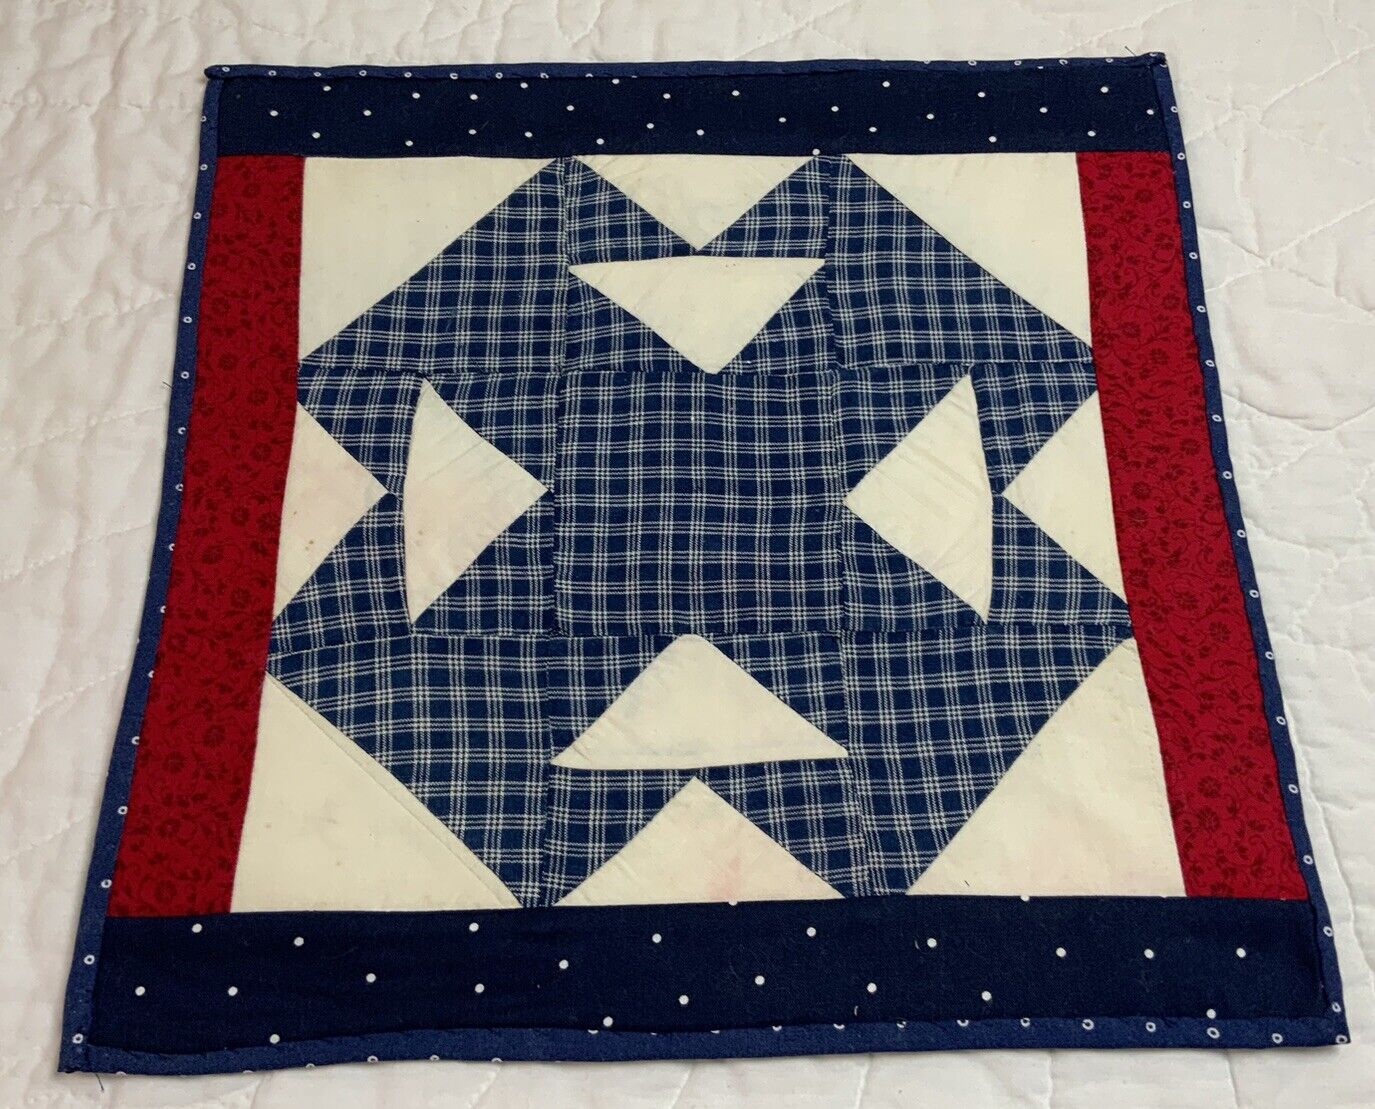 Antique Patchwork Quilt Table Topper, Early Calicos, 9 Patch With Triangles, T’s